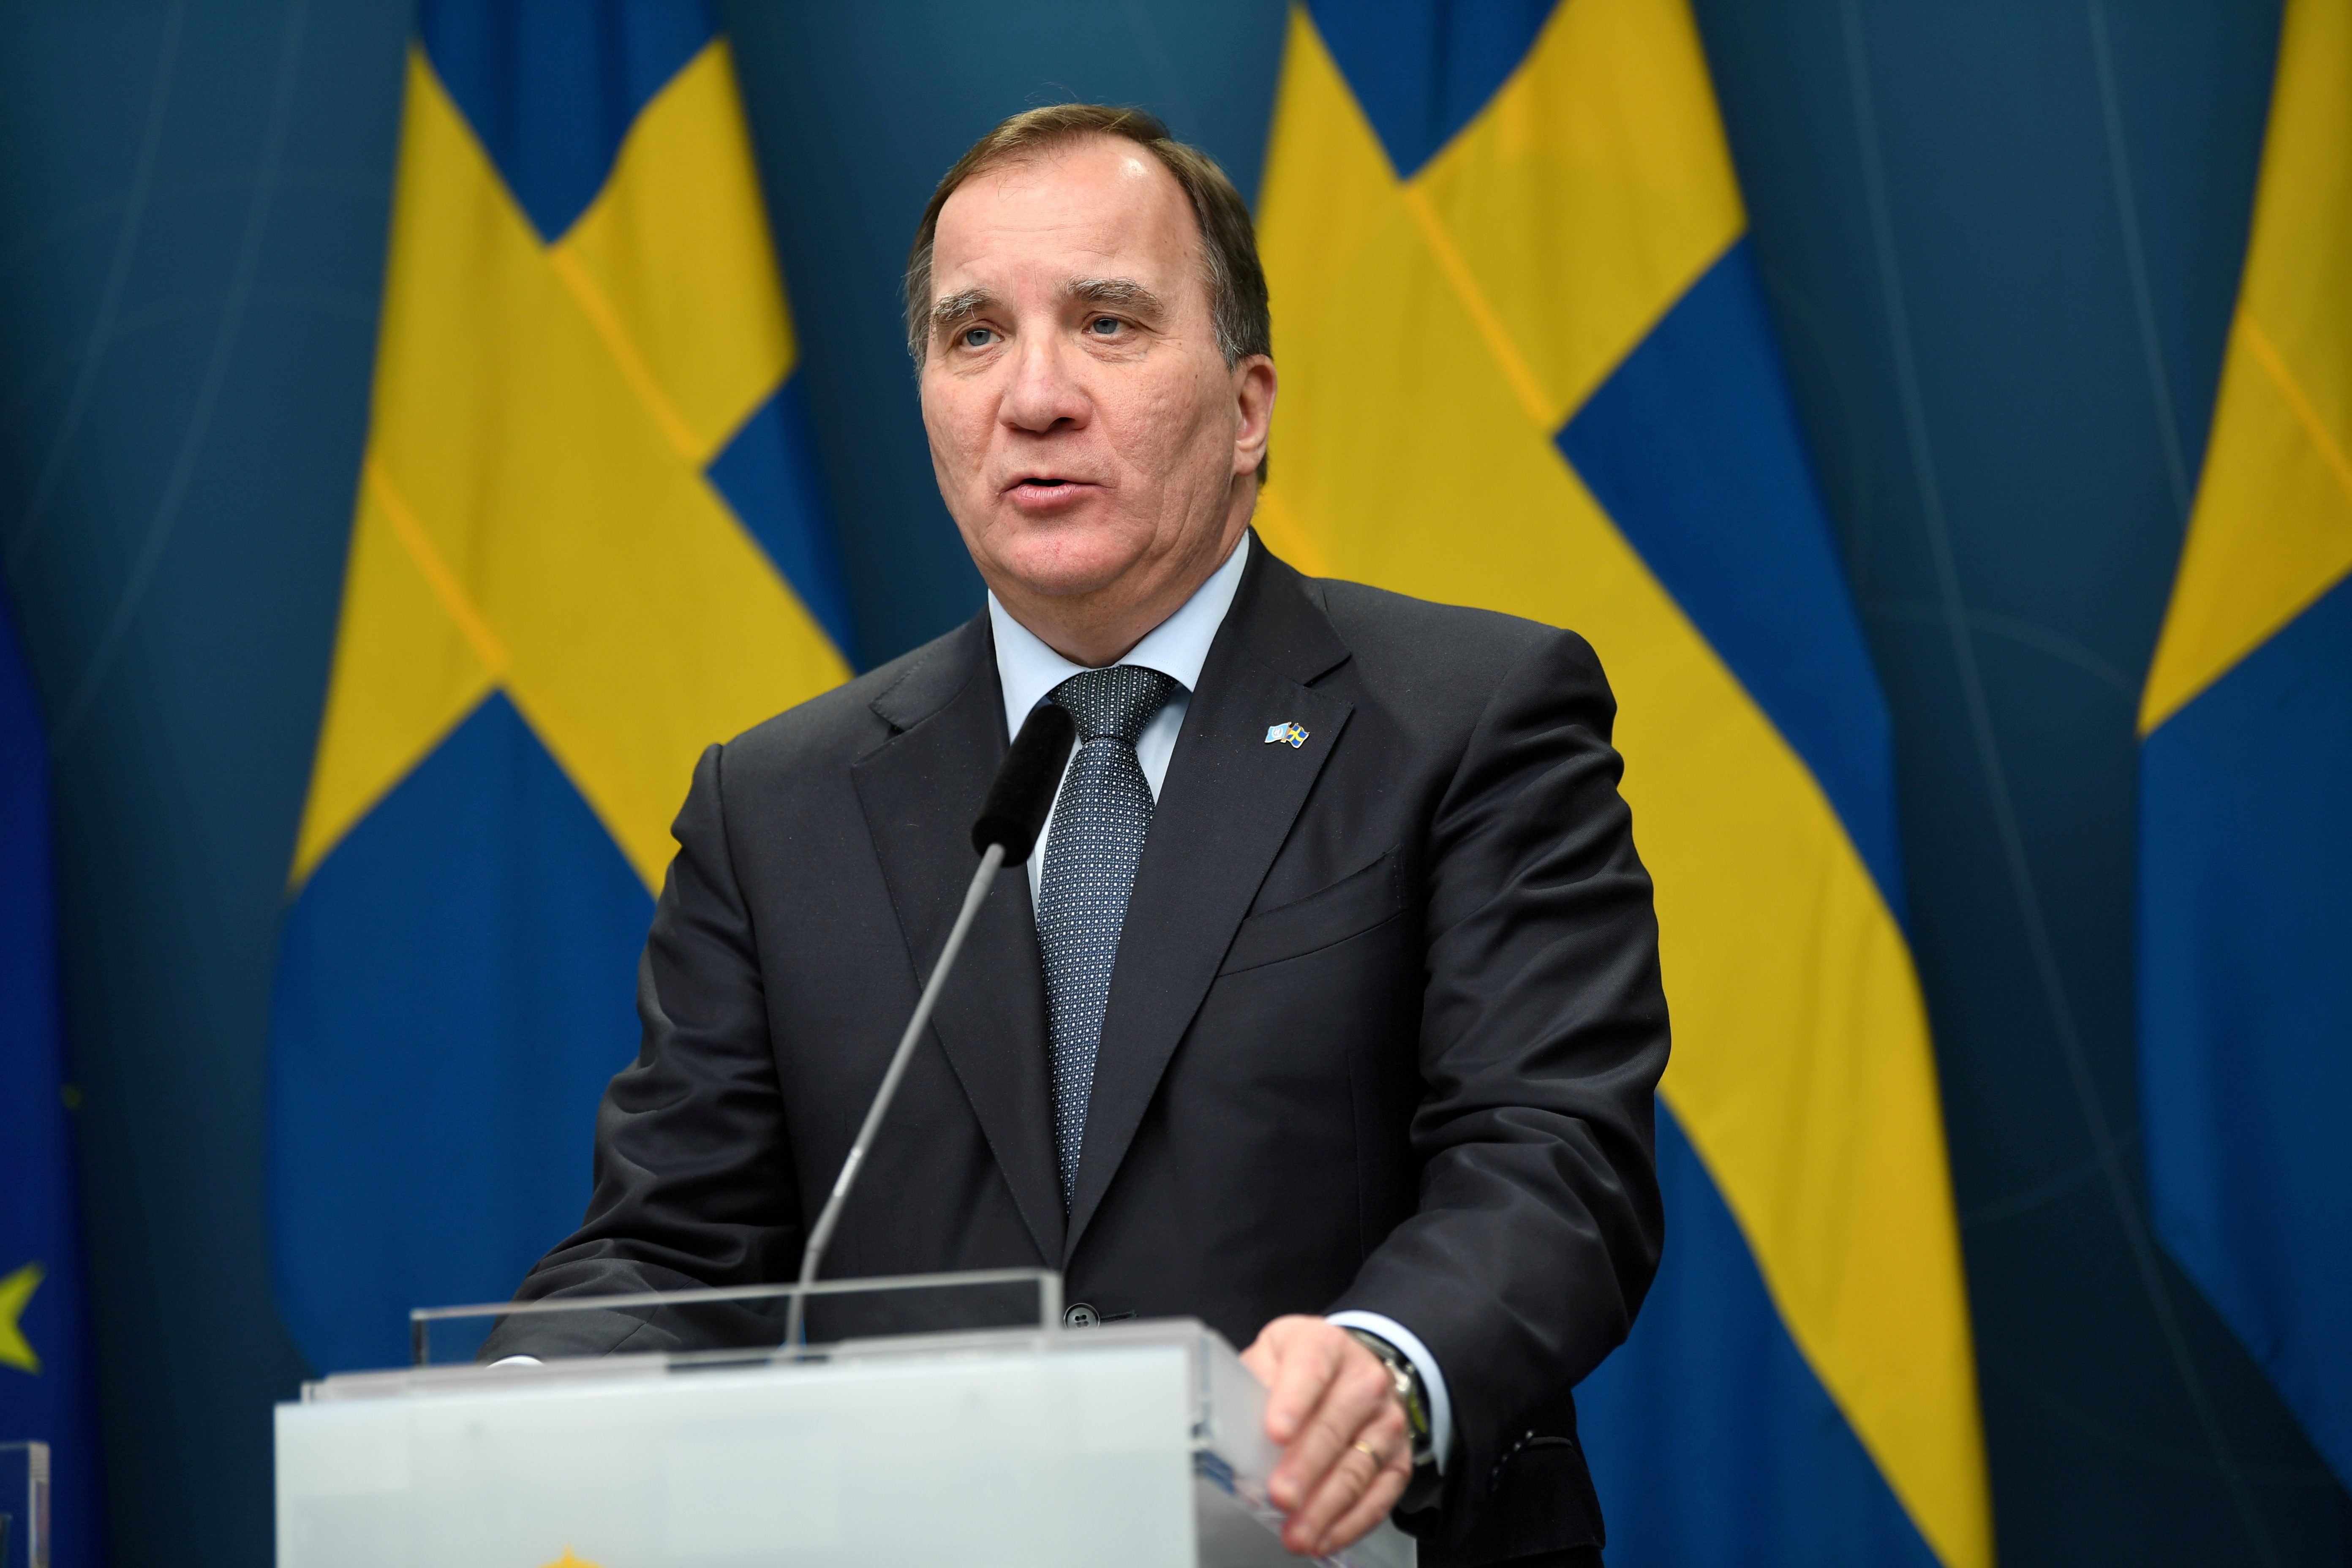 Swedish PM Lofven ousted in parliament no-confidence vote